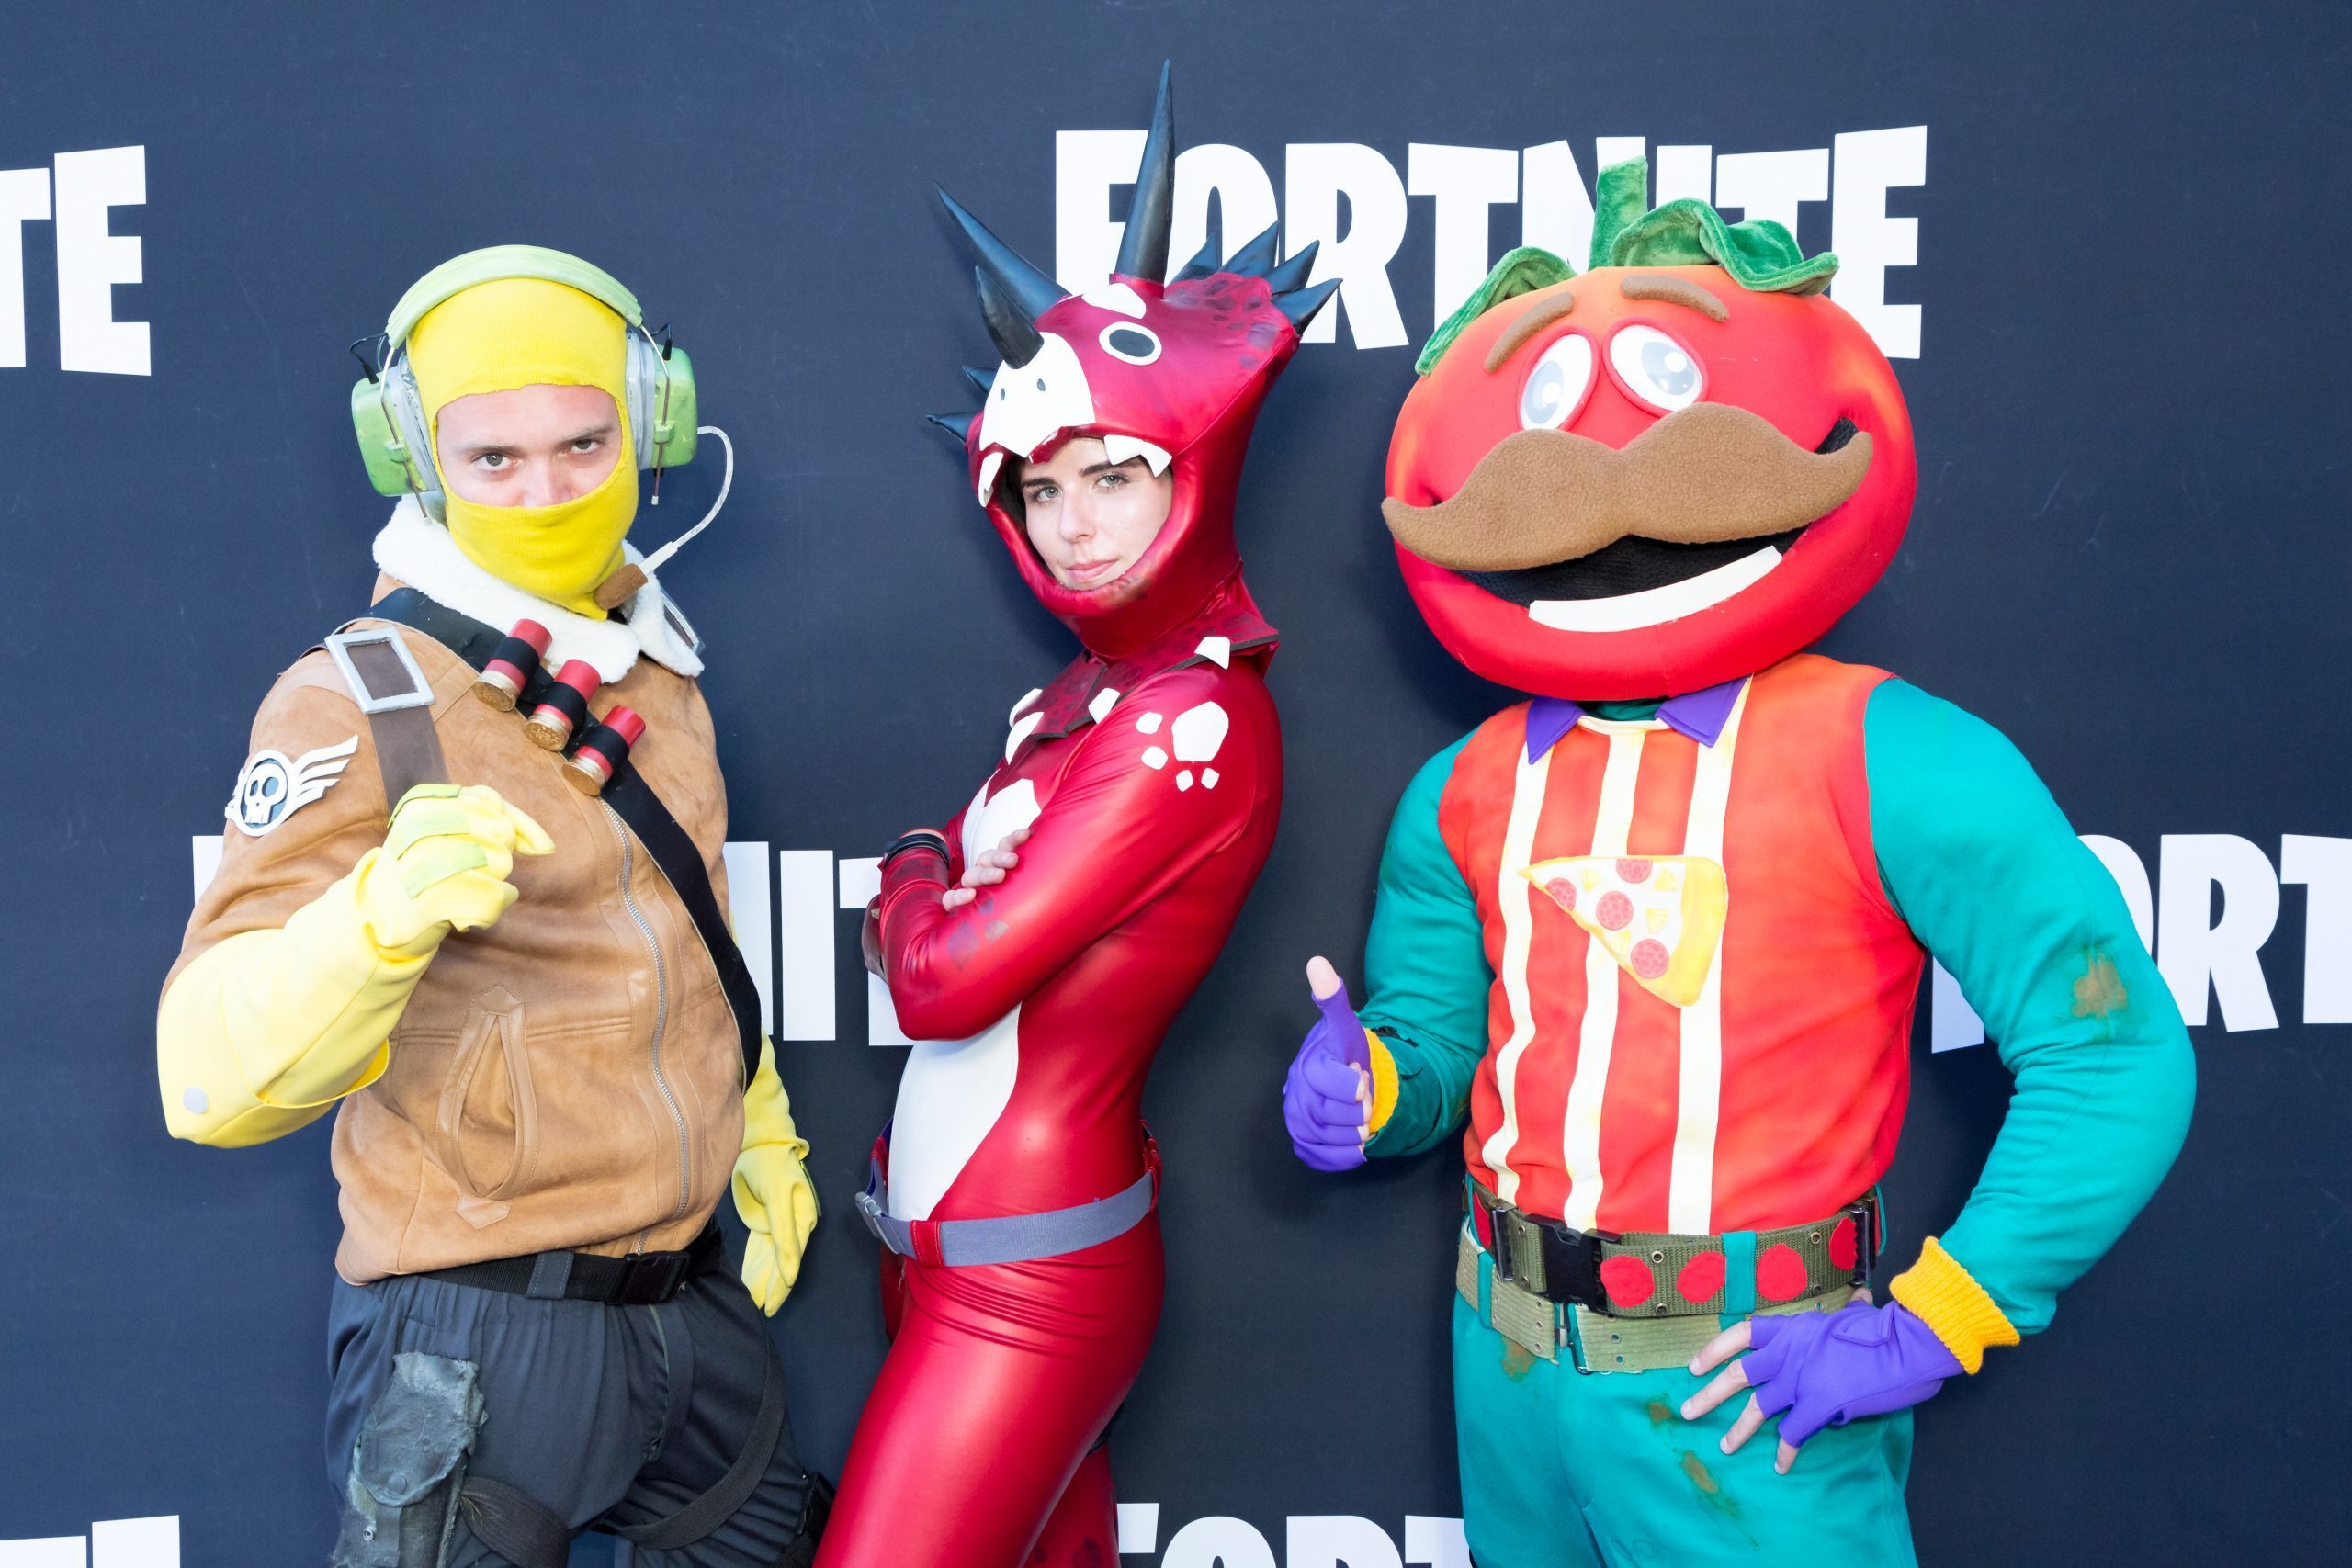 Cosplayers at Epic Games' Fortnite Party Royale on June 12, 2018 in Los Angeles, California. (Photo by Greg Doherty/Getty Images)